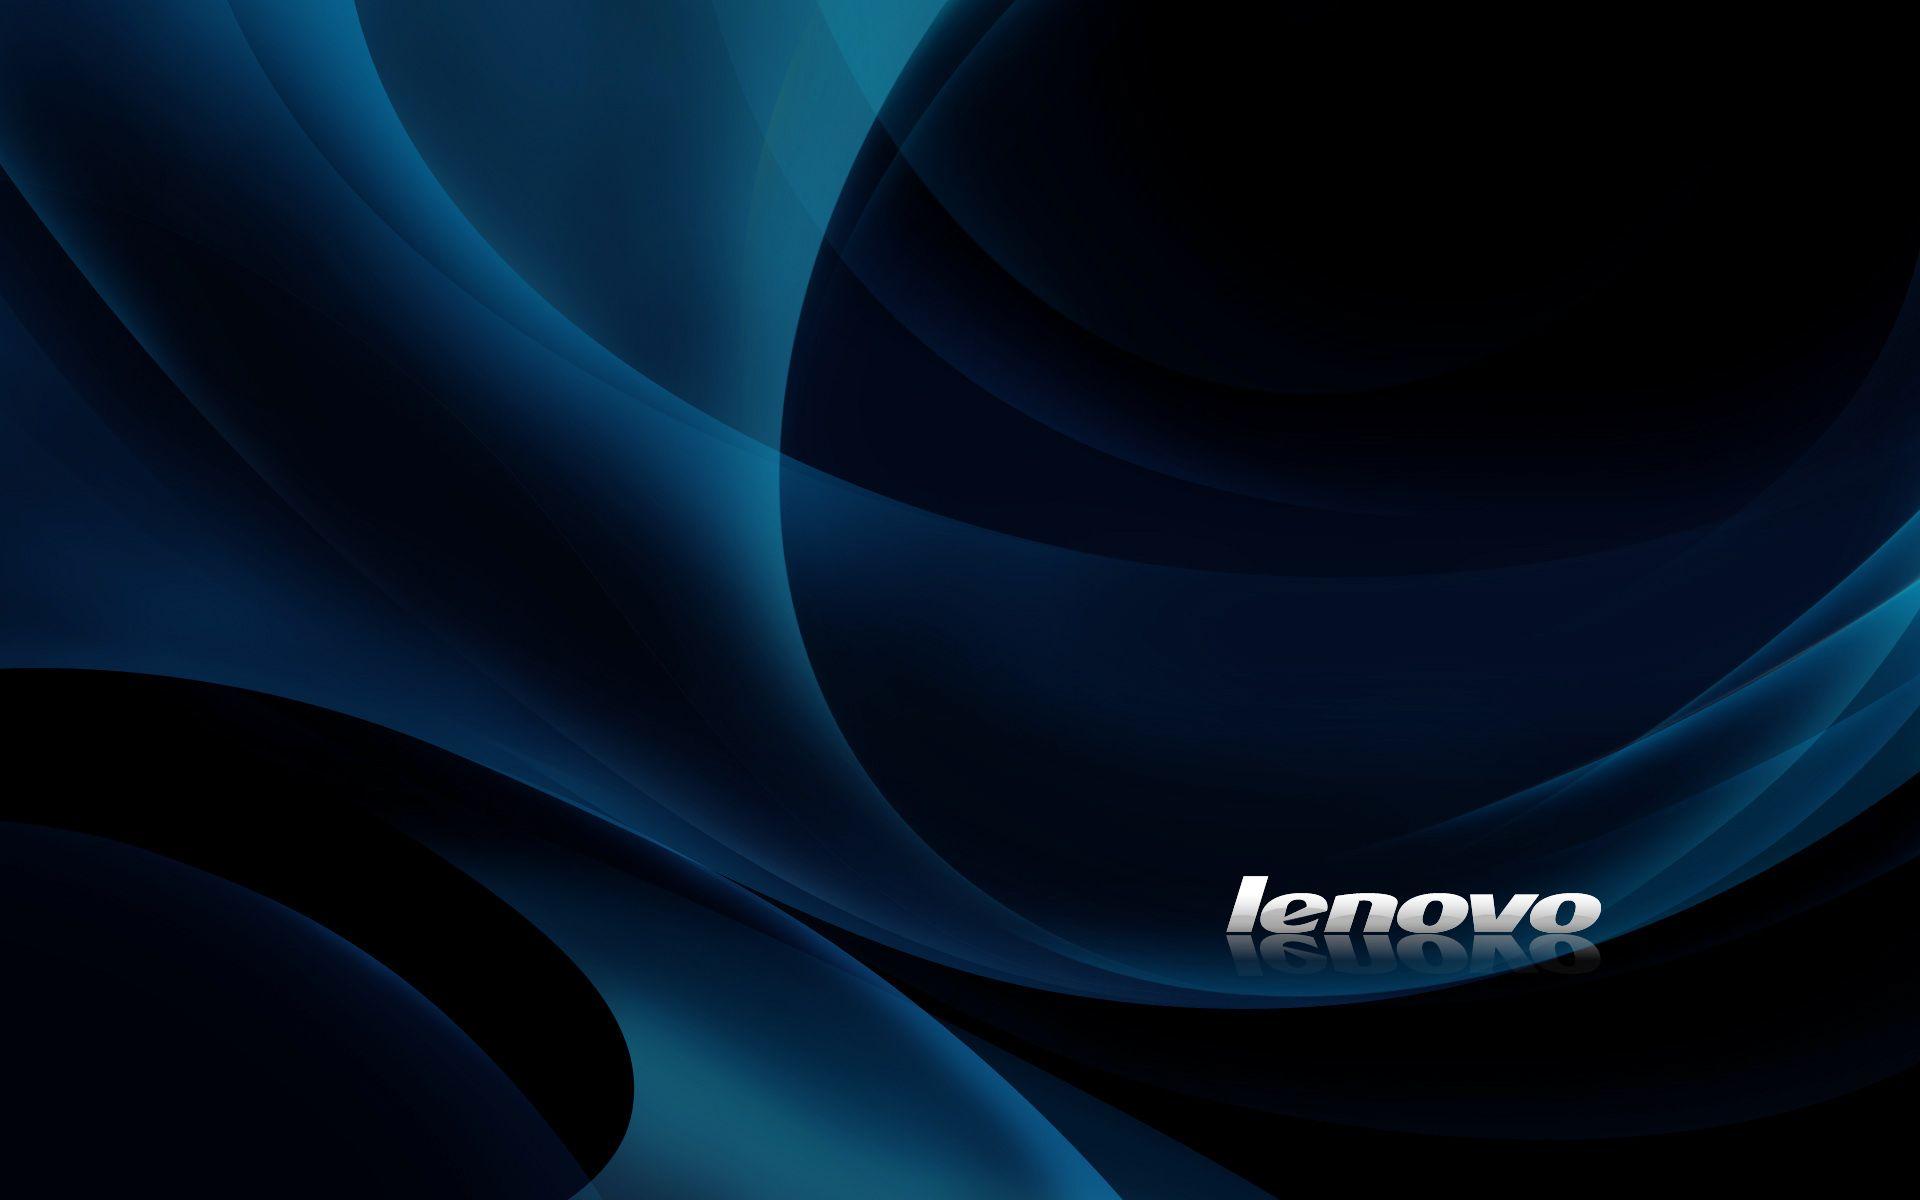 Lovely Lenovo Laptop Wallpapers Free Download Hd  Lenovo wallpapers  Laptop wallpaper Hd wallpapers for laptop